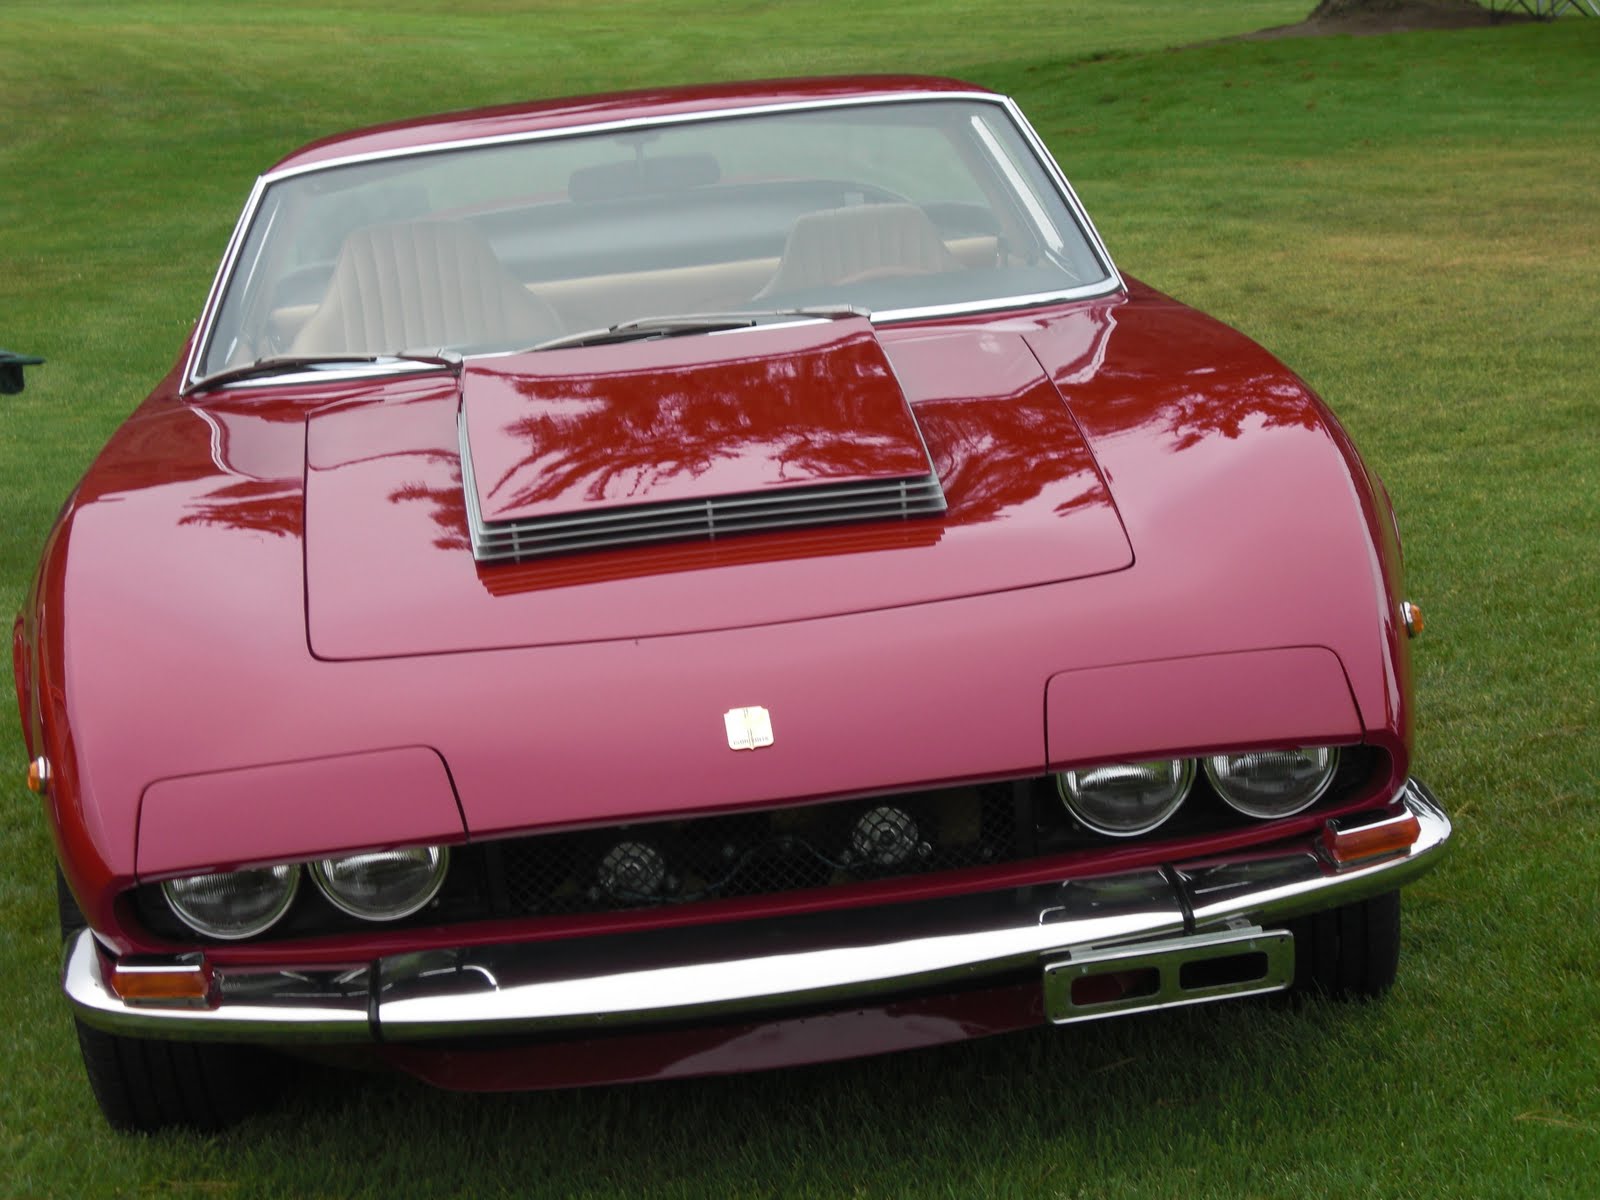 The Iso Grifo Has The Most Unusual Hood Scoop Ever.